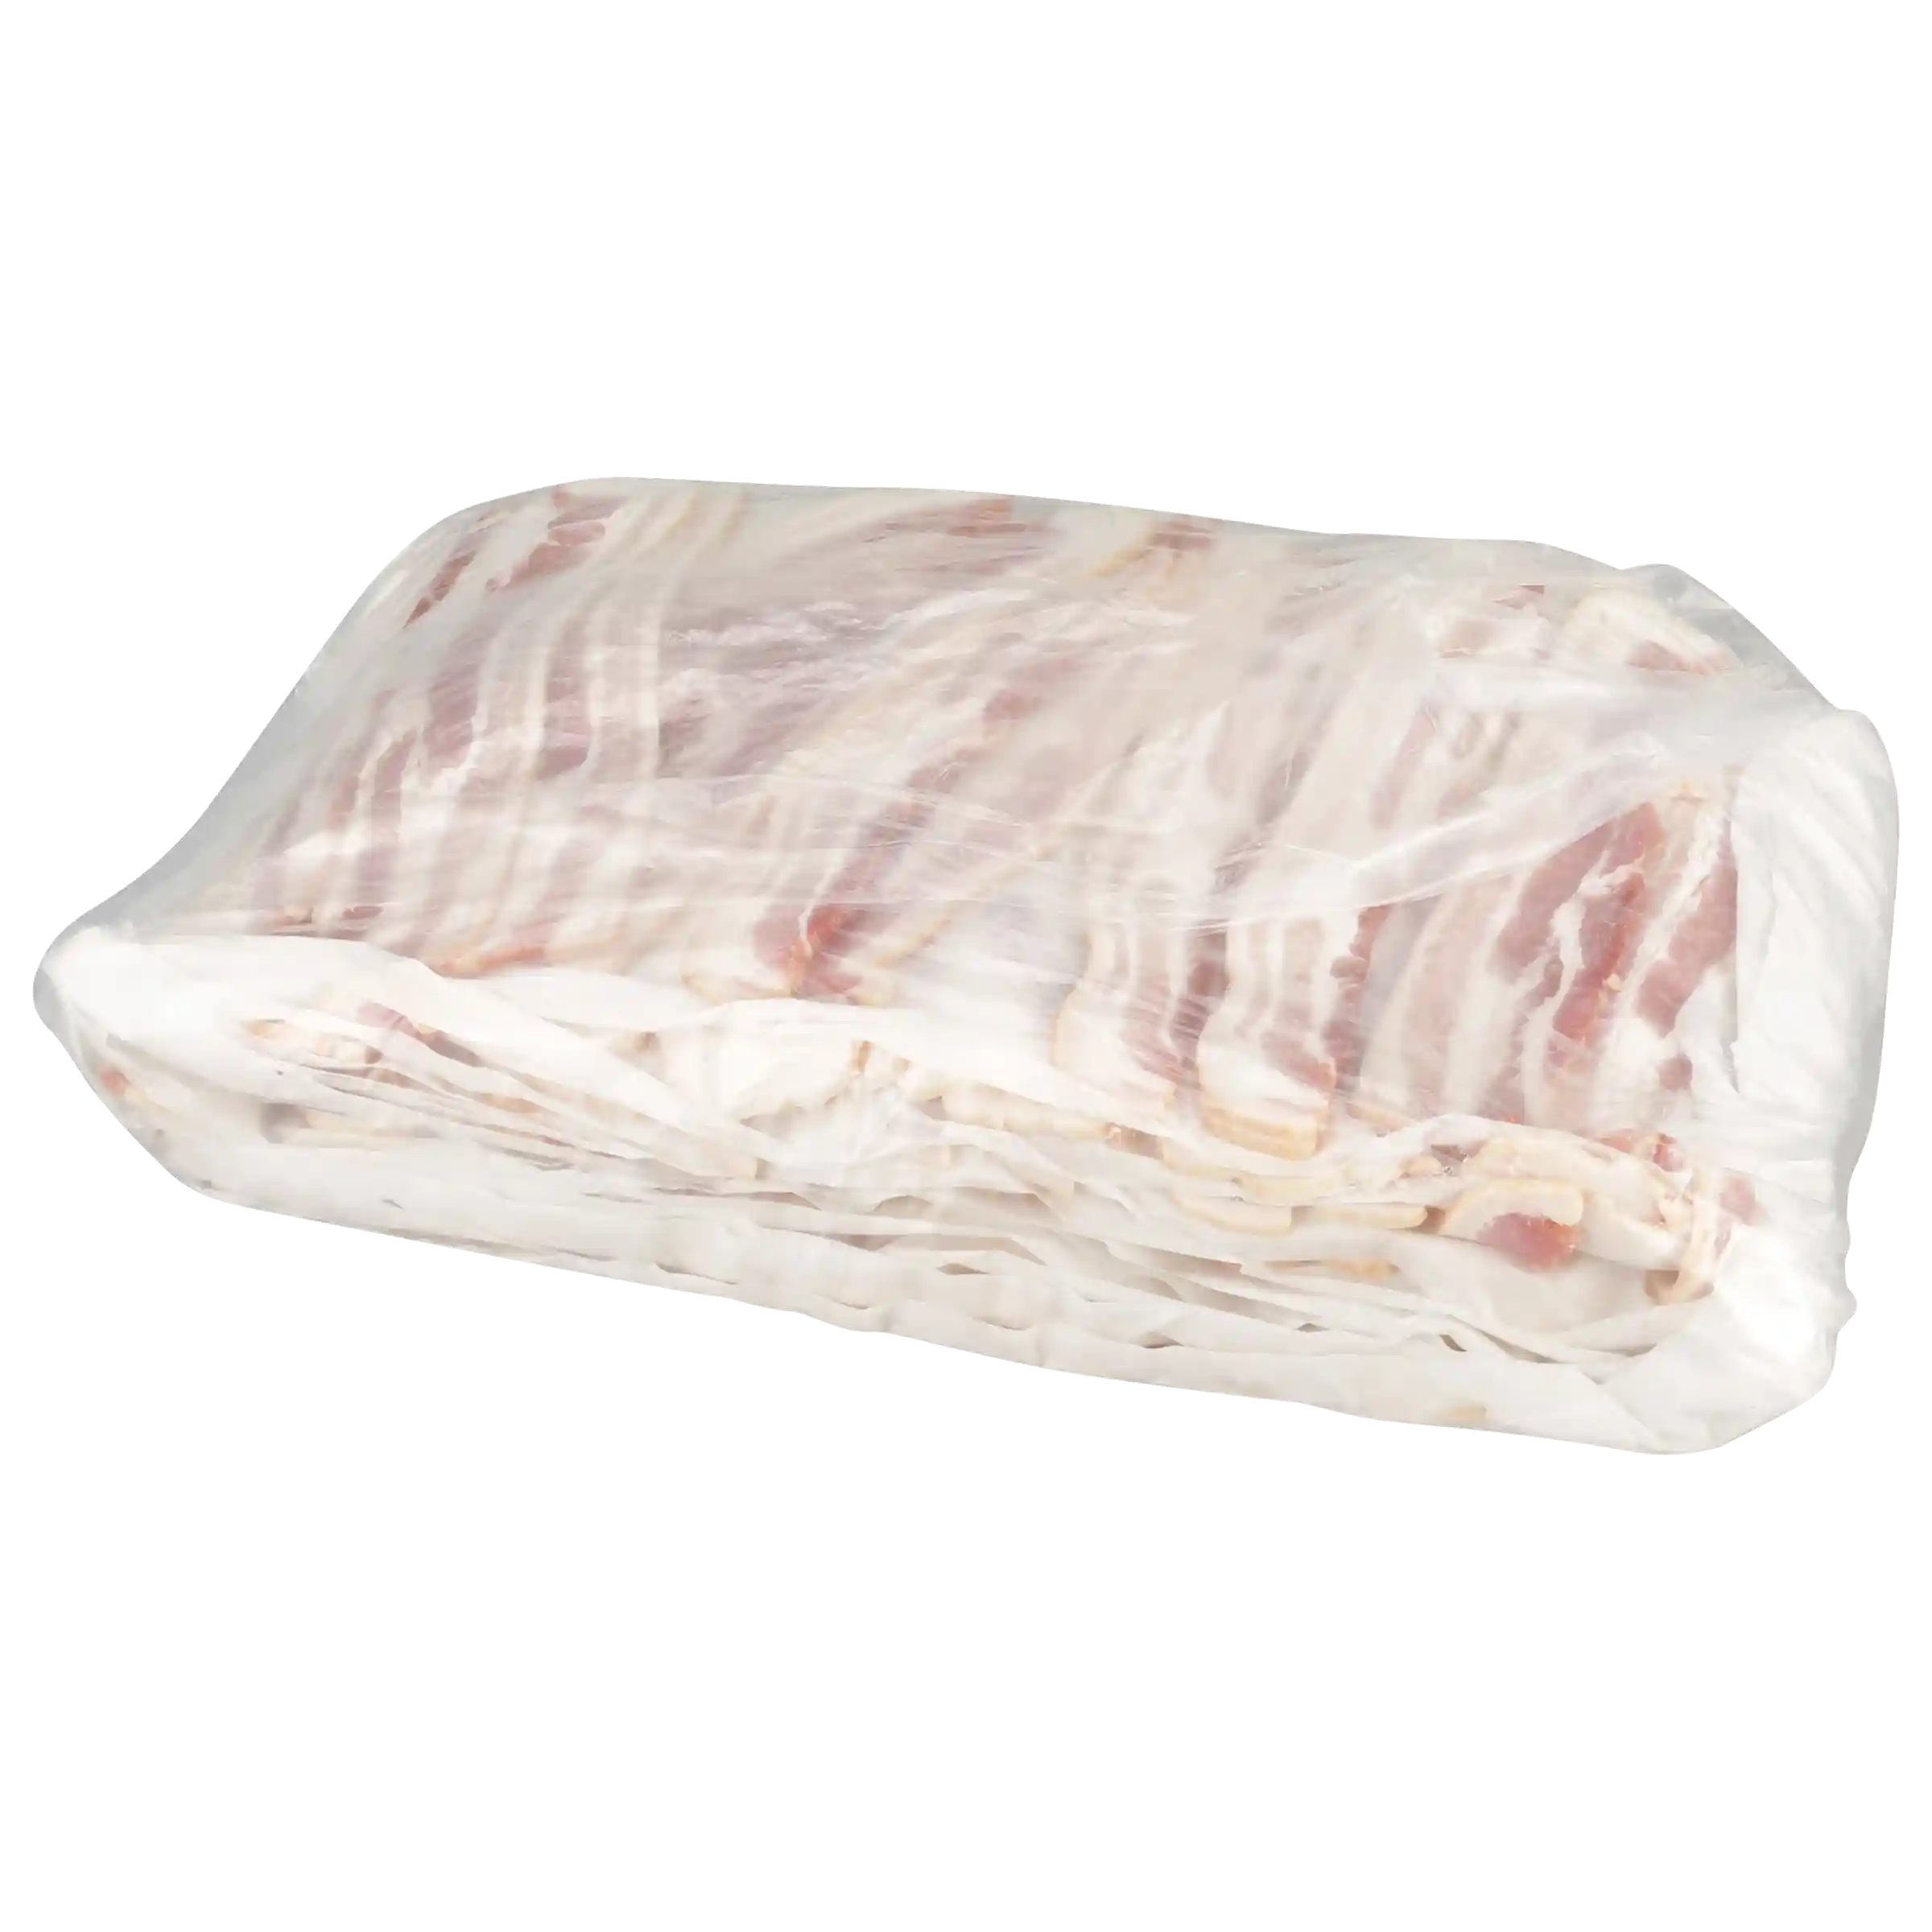 Wright® Brand Naturally Hickory Smoked Thick Sliced Bacon, Flat-Pack®, 15 Lbs, 10-14 Slices per Pound, Frozen_image_21